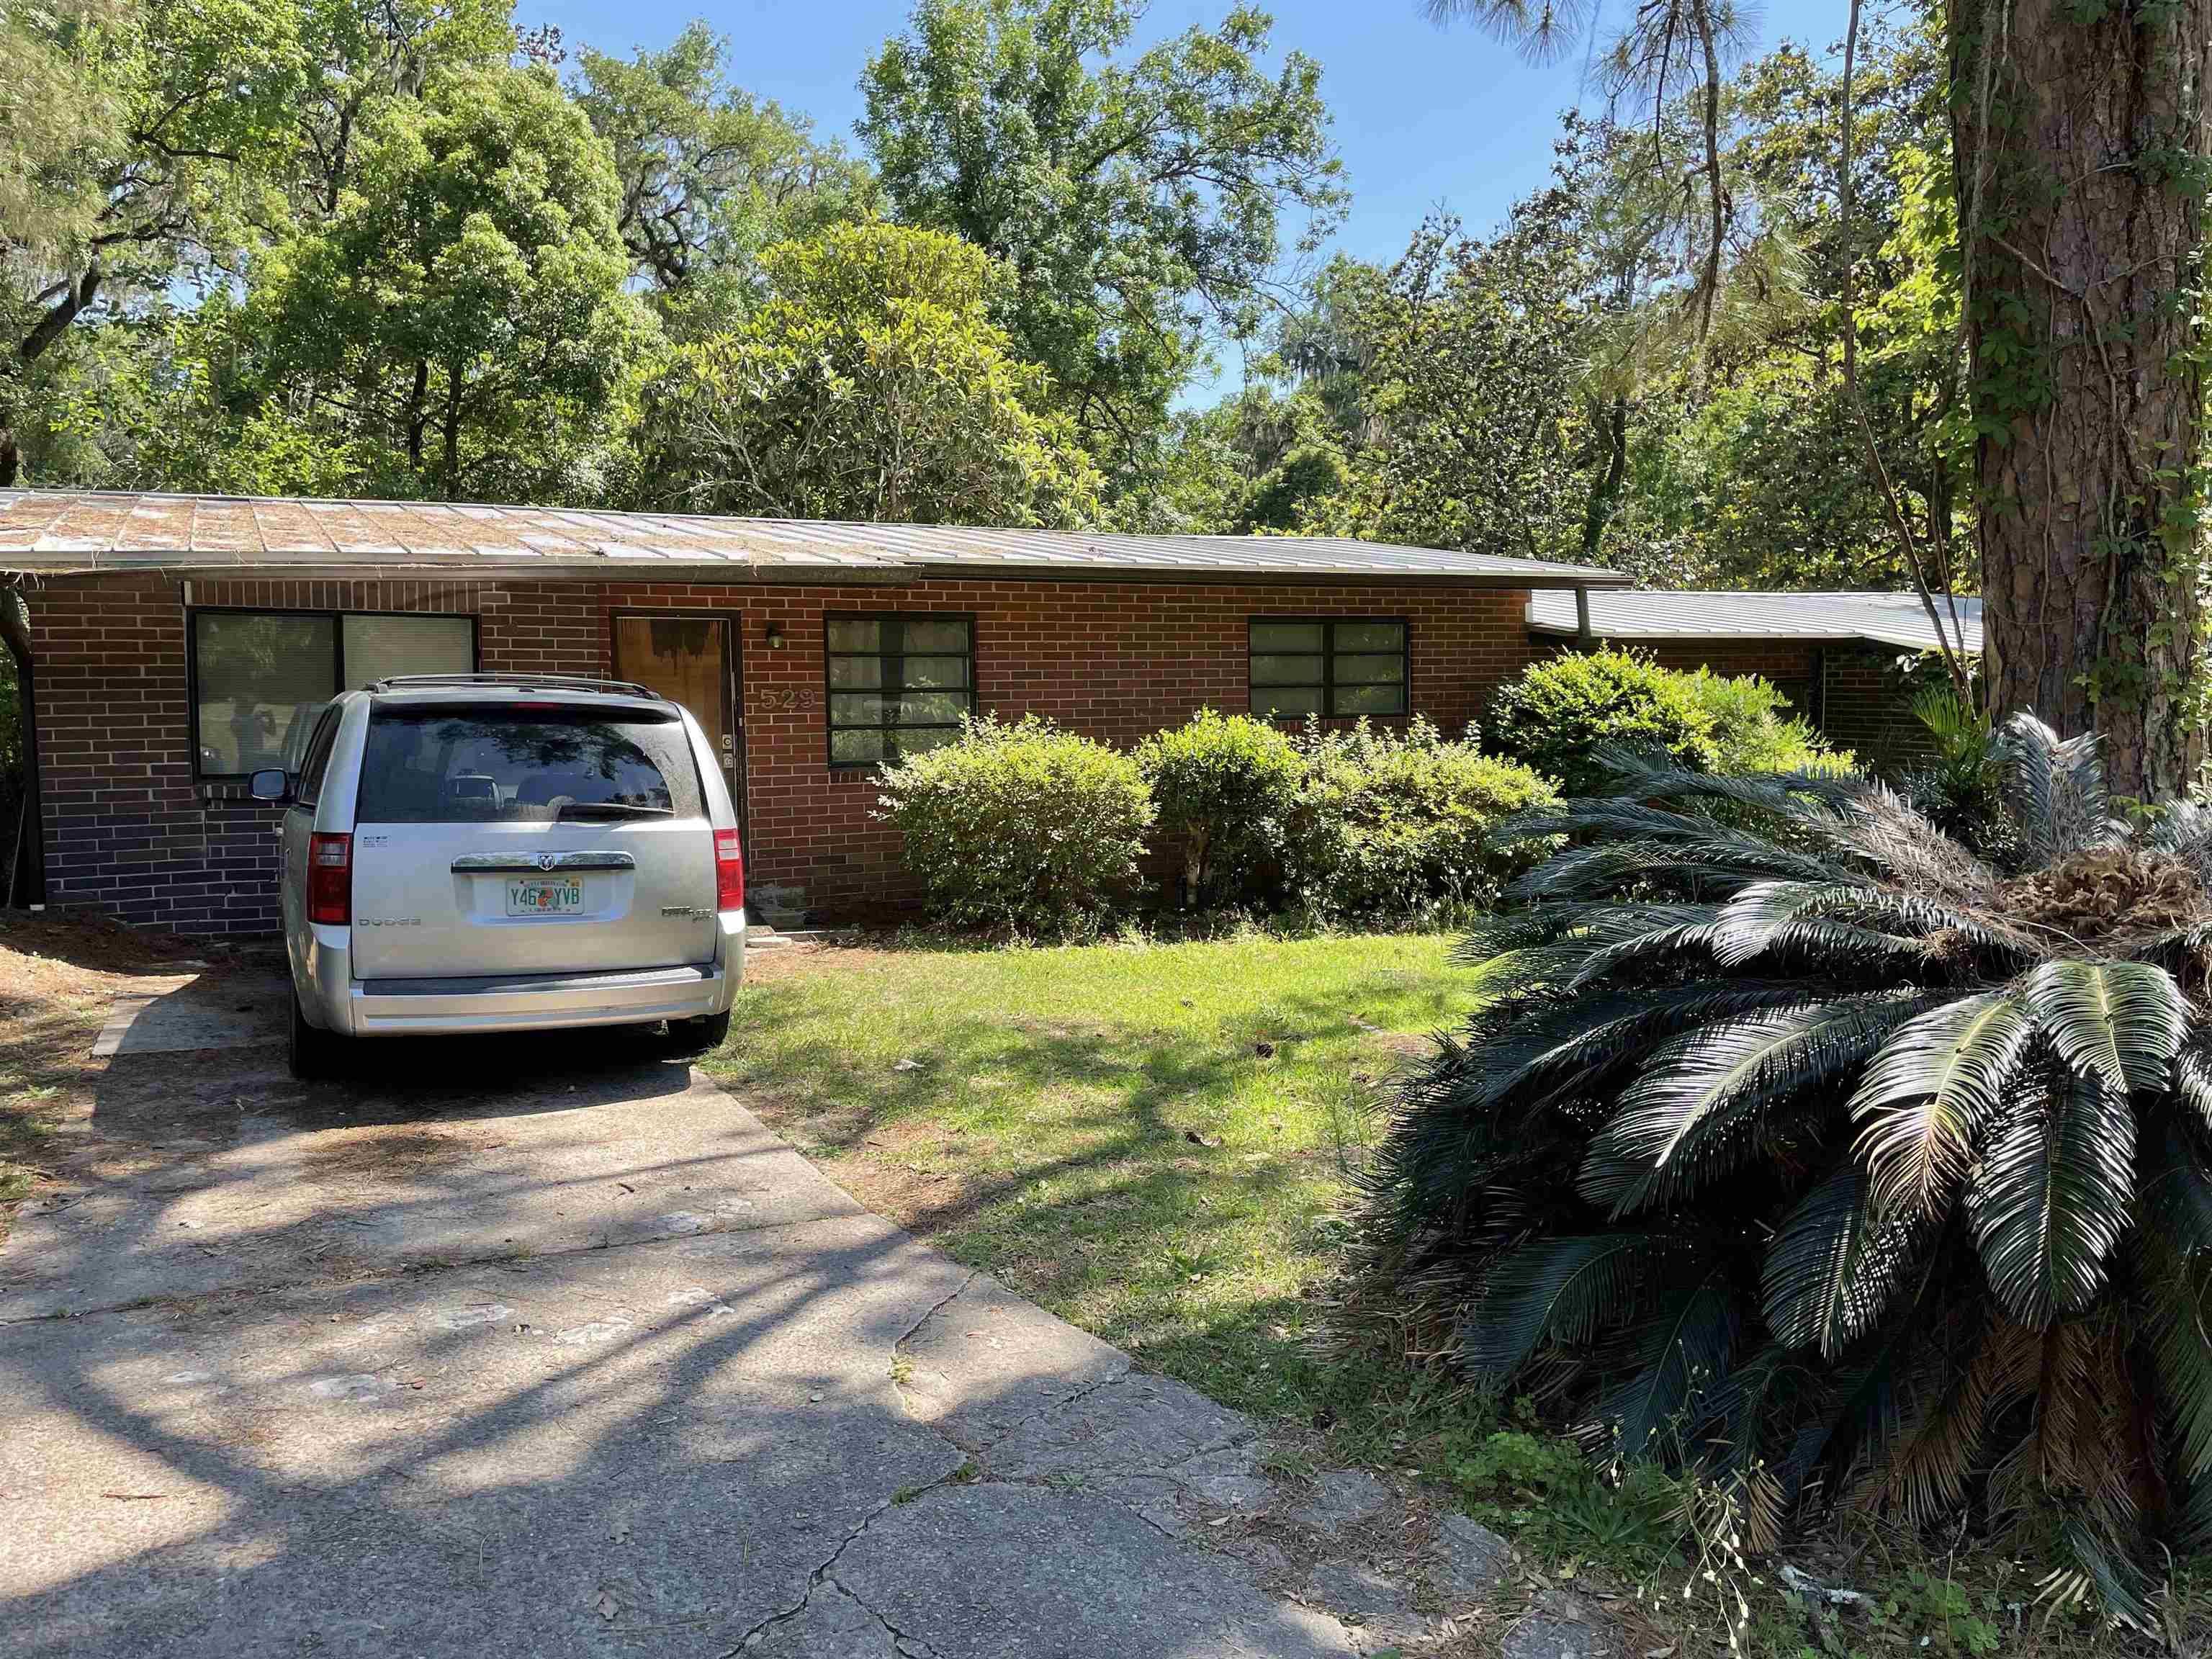 Bring your investors! This is the rarest one of all! All brick duplex with a separate apartment underneath, in PRIME Myers Park! Walk to Cascades Park and downtown within minutes. Close to FSU, FAMU, Greenwise, Gaines street shops, and more..... Each unit of the duplex is 3/2, while the apartment underneath is a 2/2. Super well maintained and has been cared for under property management. Roof 2017. All units are under rented, with leases expiring soon. Adjoining parcel with similar duplex, as well as a tiny home rather than an apartment below that has just been currently leased at market rent, also for sale. Don't miss this opportunity to have a prime investment location in the heart of Tallahassee. Bring your offers! Pictures are older and limited. Newer ones will be coming soon. All measurements are approximate and should be independently reviewed and verified for accuracy.